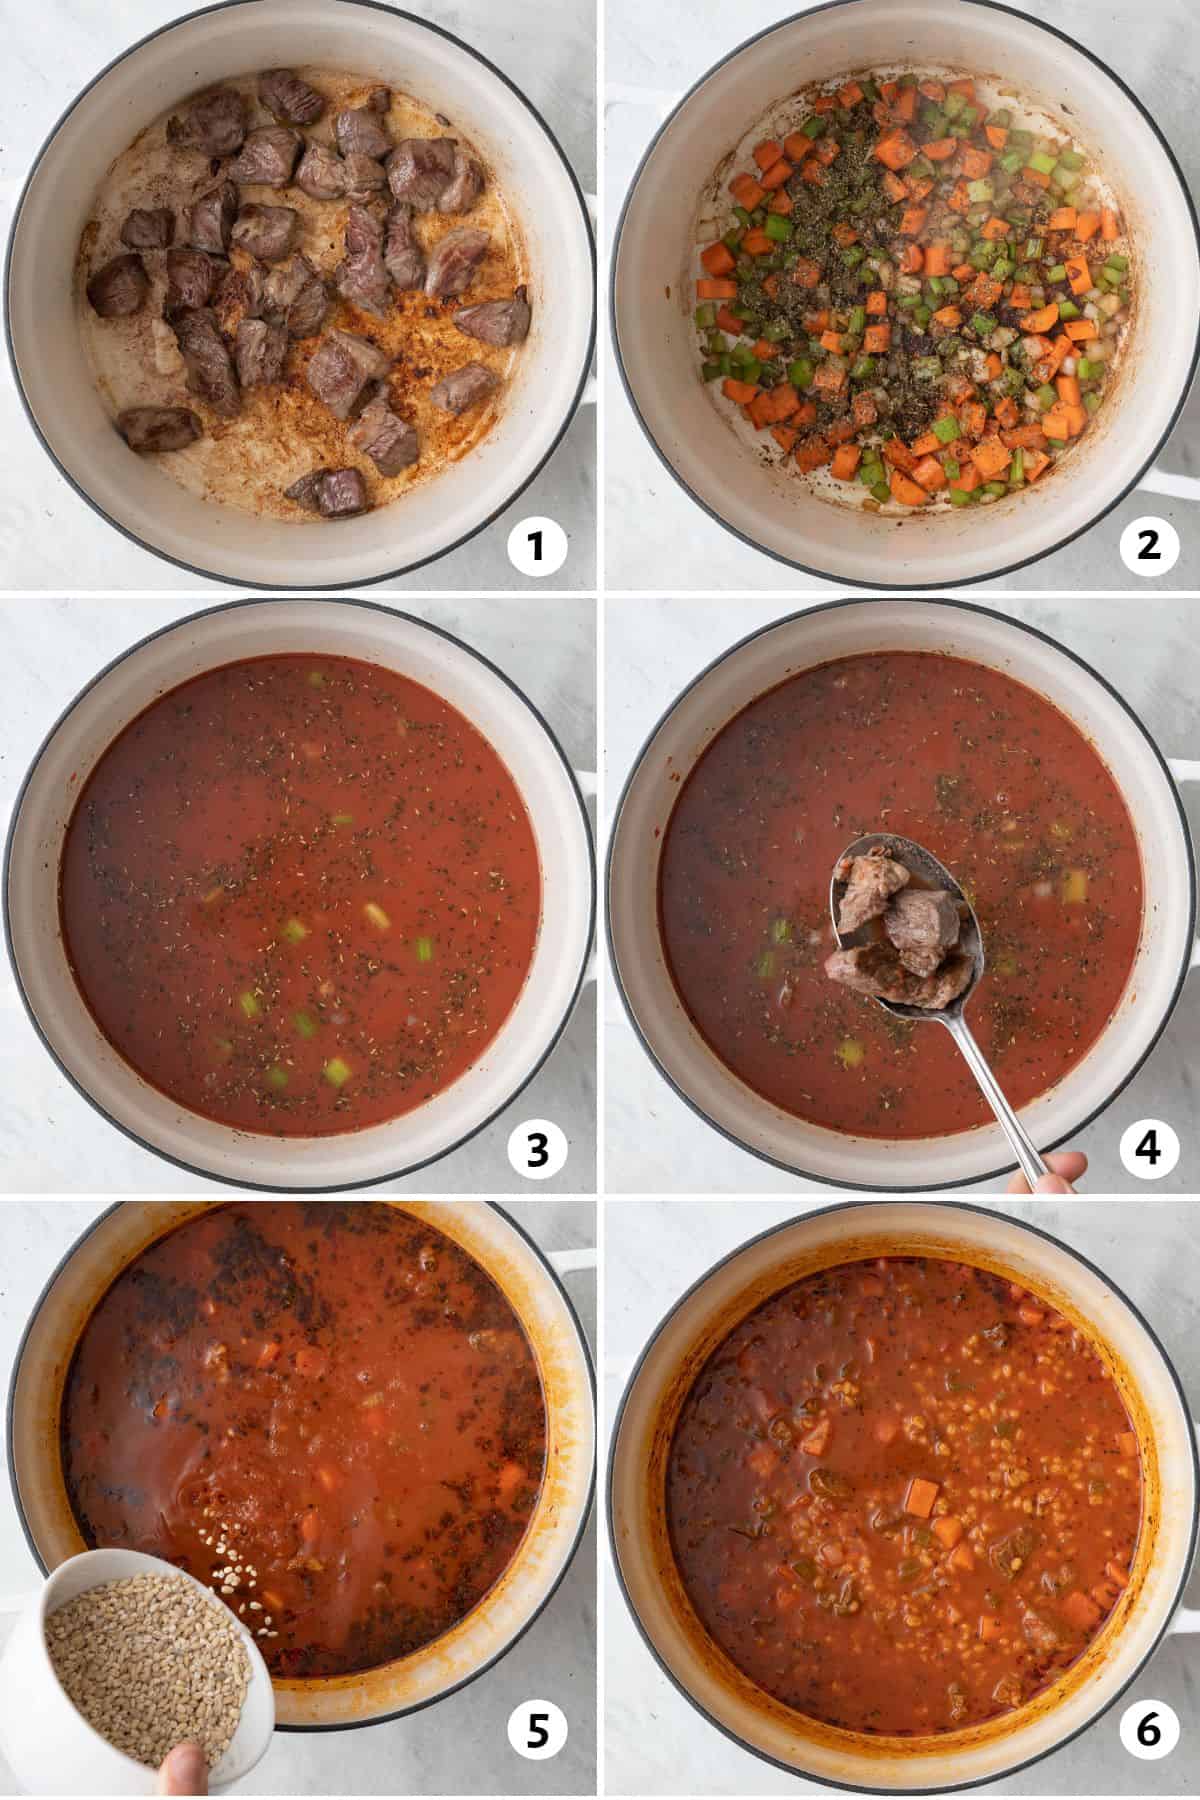 6 image collage making recipe in one pot: 1-cooked beef in large dutch oven after cooked, 2- veggies cooked with seasoning added, 3- liquids added, 4- beef returned to pot, 5- pearl barley being poured into soup, 6- soup after barley has cooked.